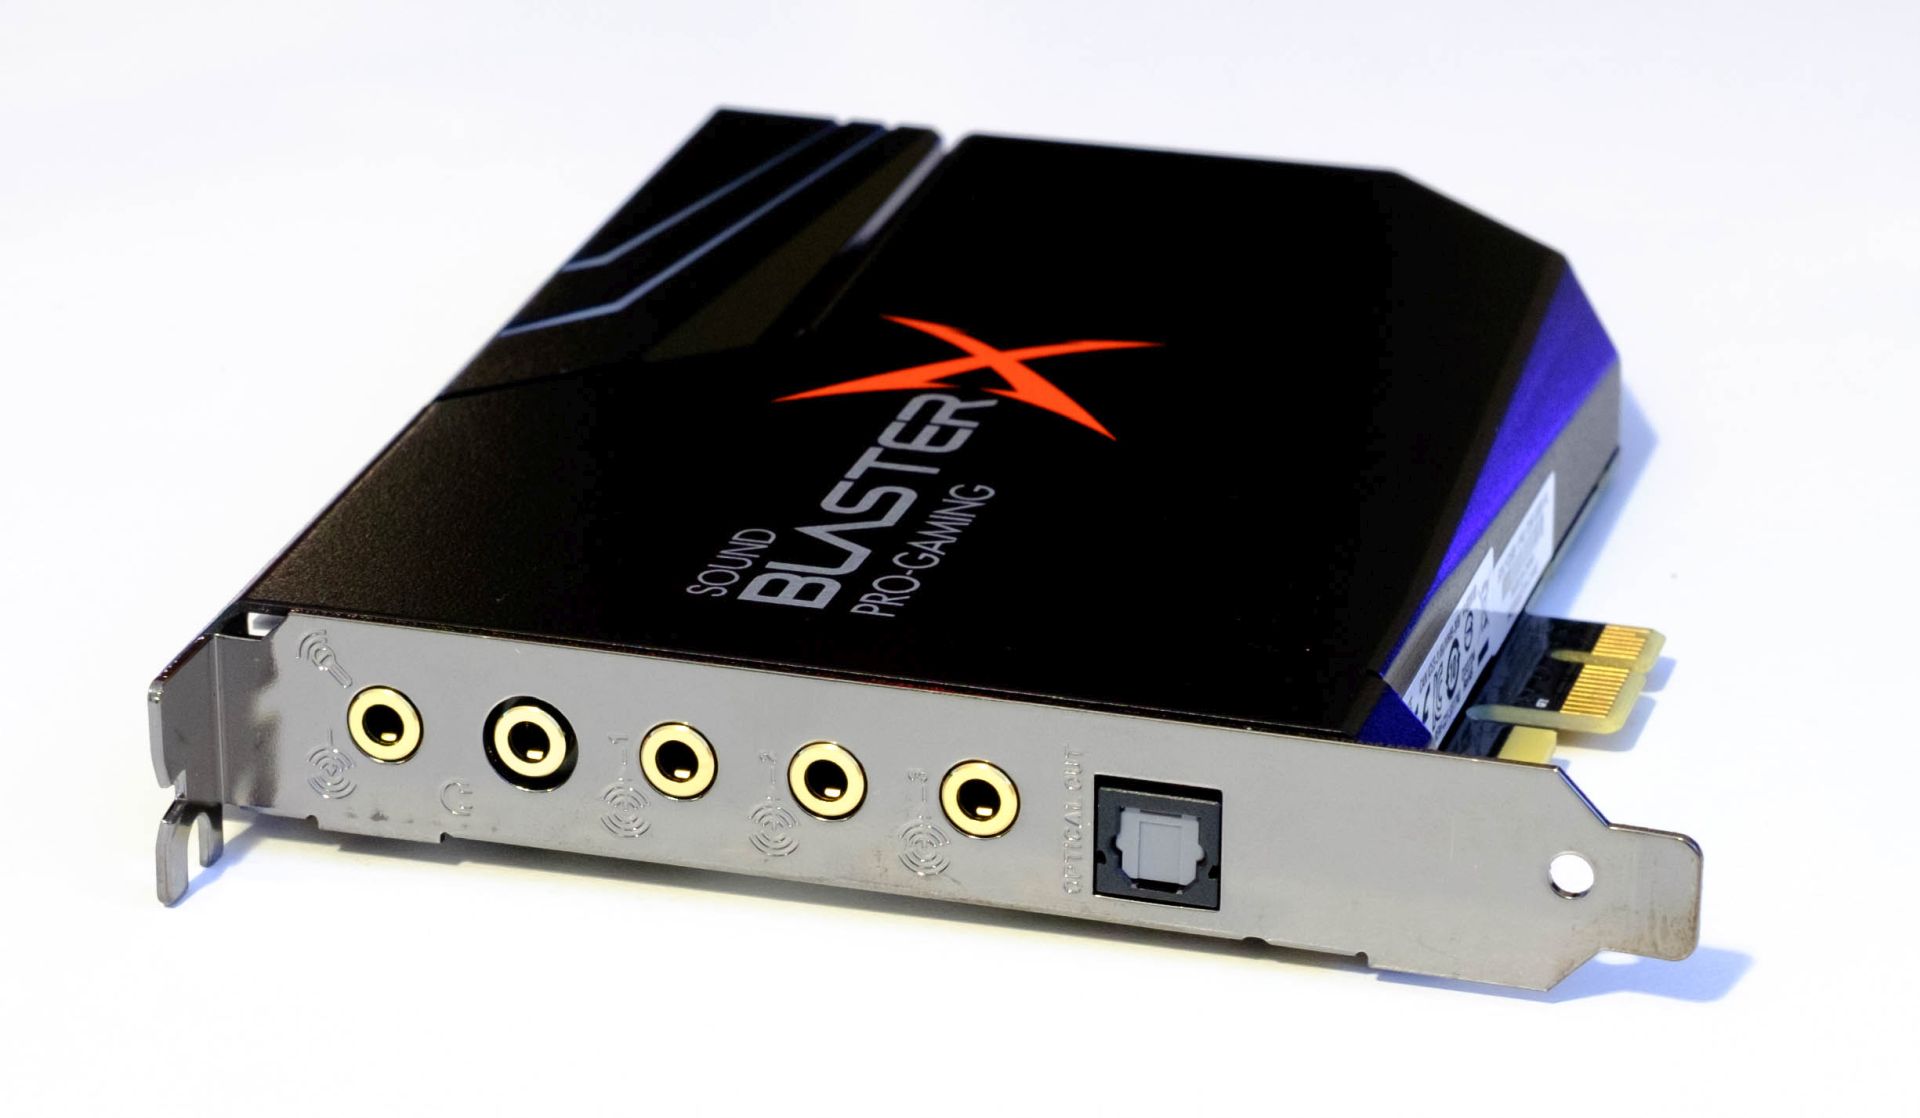 Sound BlasterX AE-5 Review: An Uncompromising Gaming Sound Card For Audiophiles